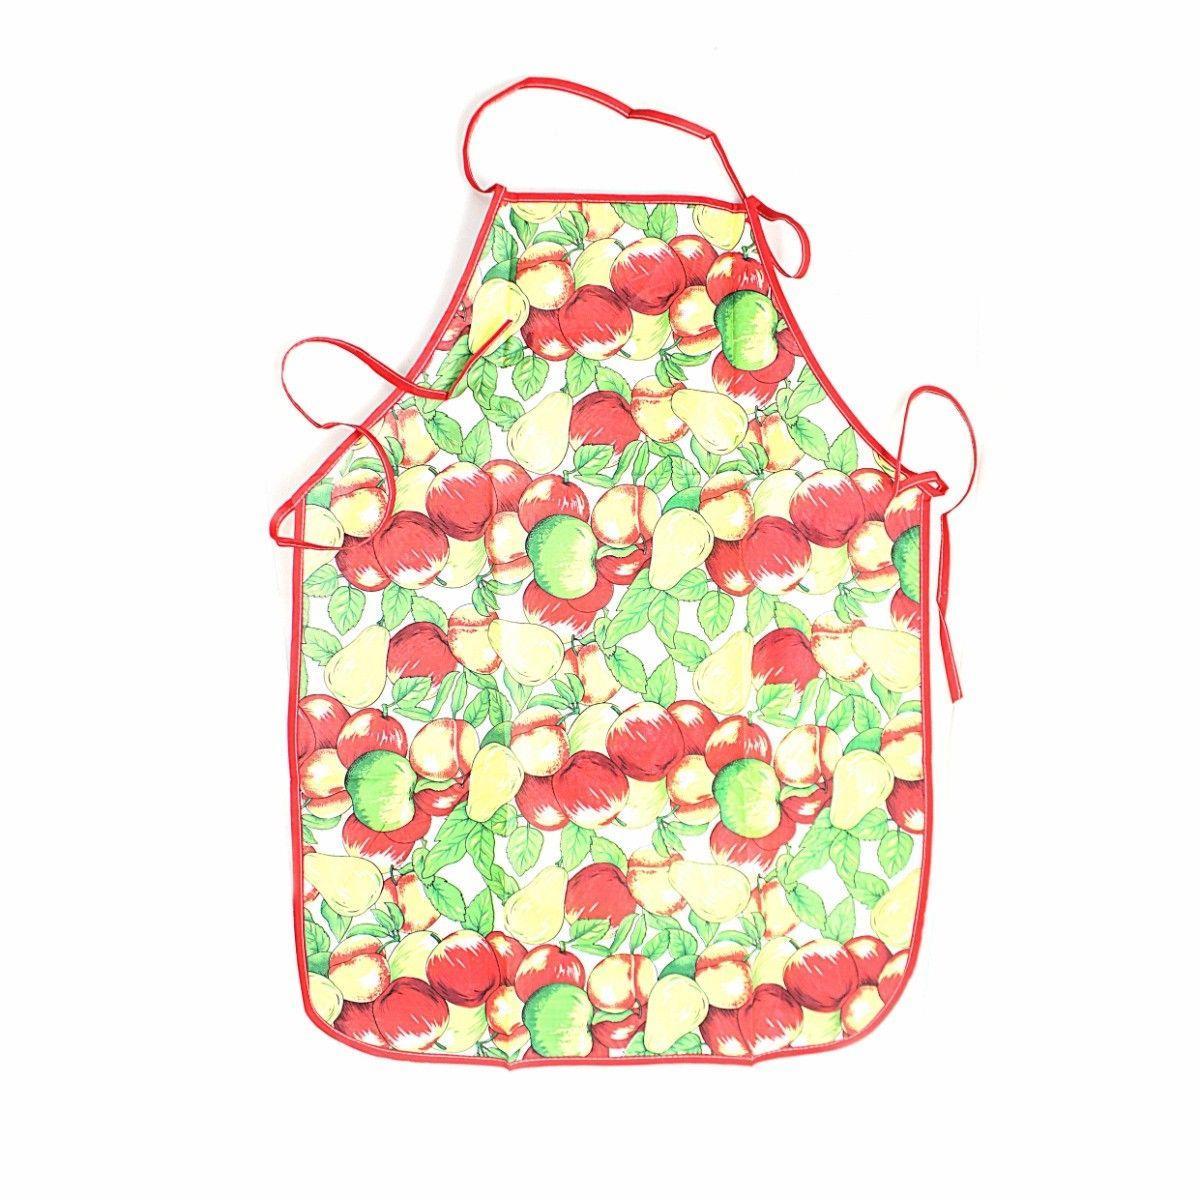 Kitchen Baking Cooking Apron 74 x 55 cm Assorted Designs 3280 (Large Letter Rate)